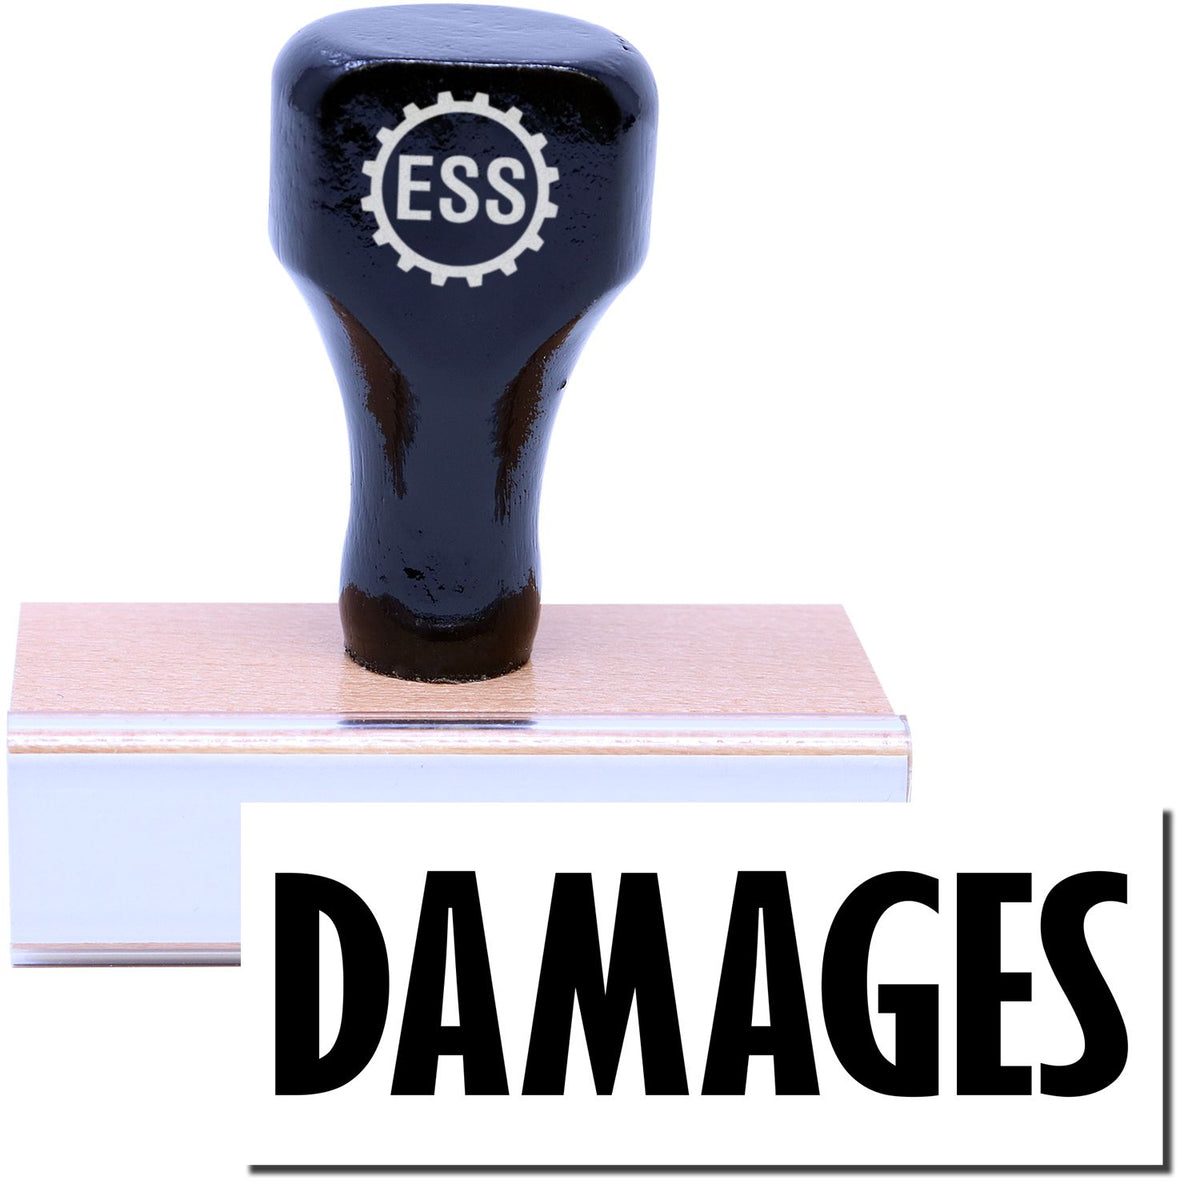 A stock office rubber stamp with a stamped image showing how the text &quot;DAMAGES&quot; is displayed after stamping.